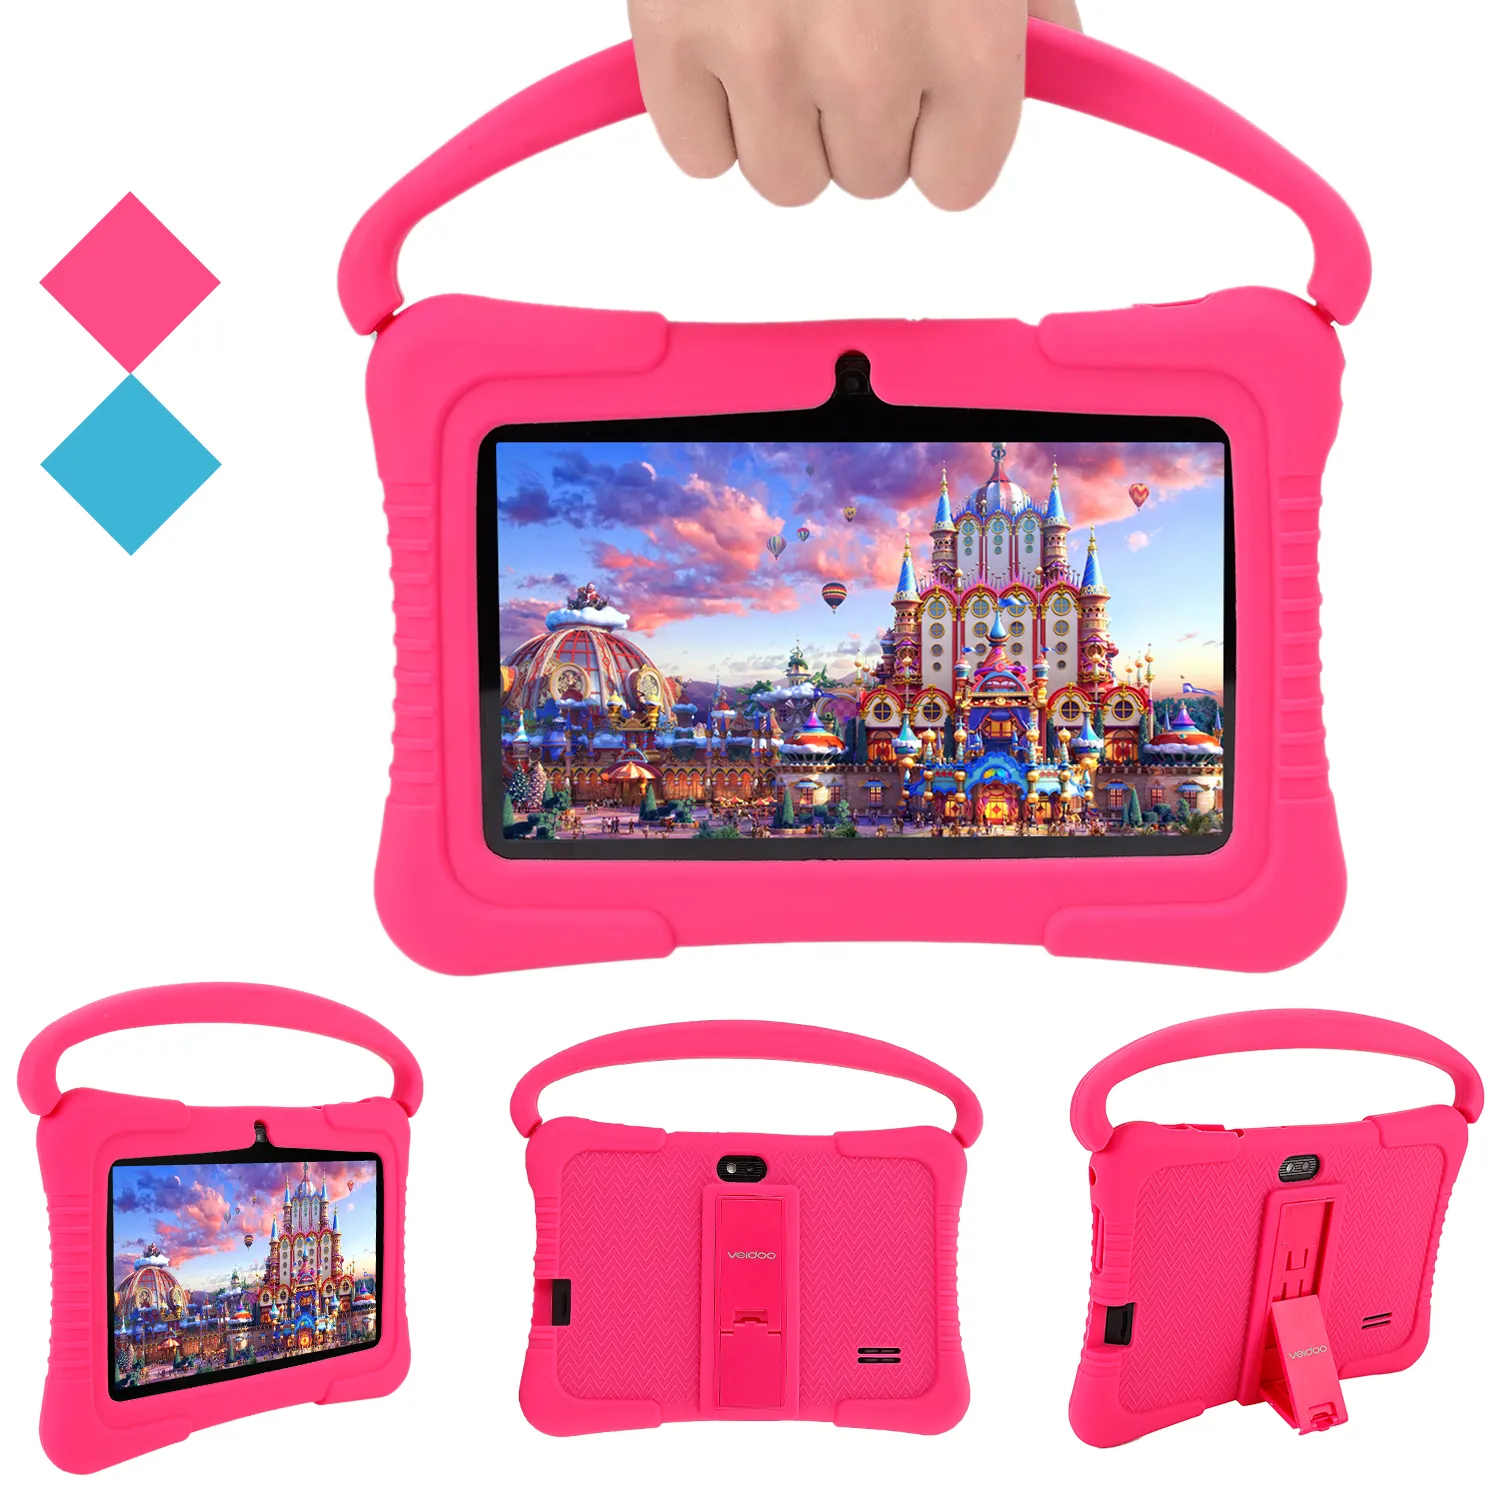 Hot Sale Tablet 7 Inch Touchscreen Cheap Oem Kids Educational Tablet Pc